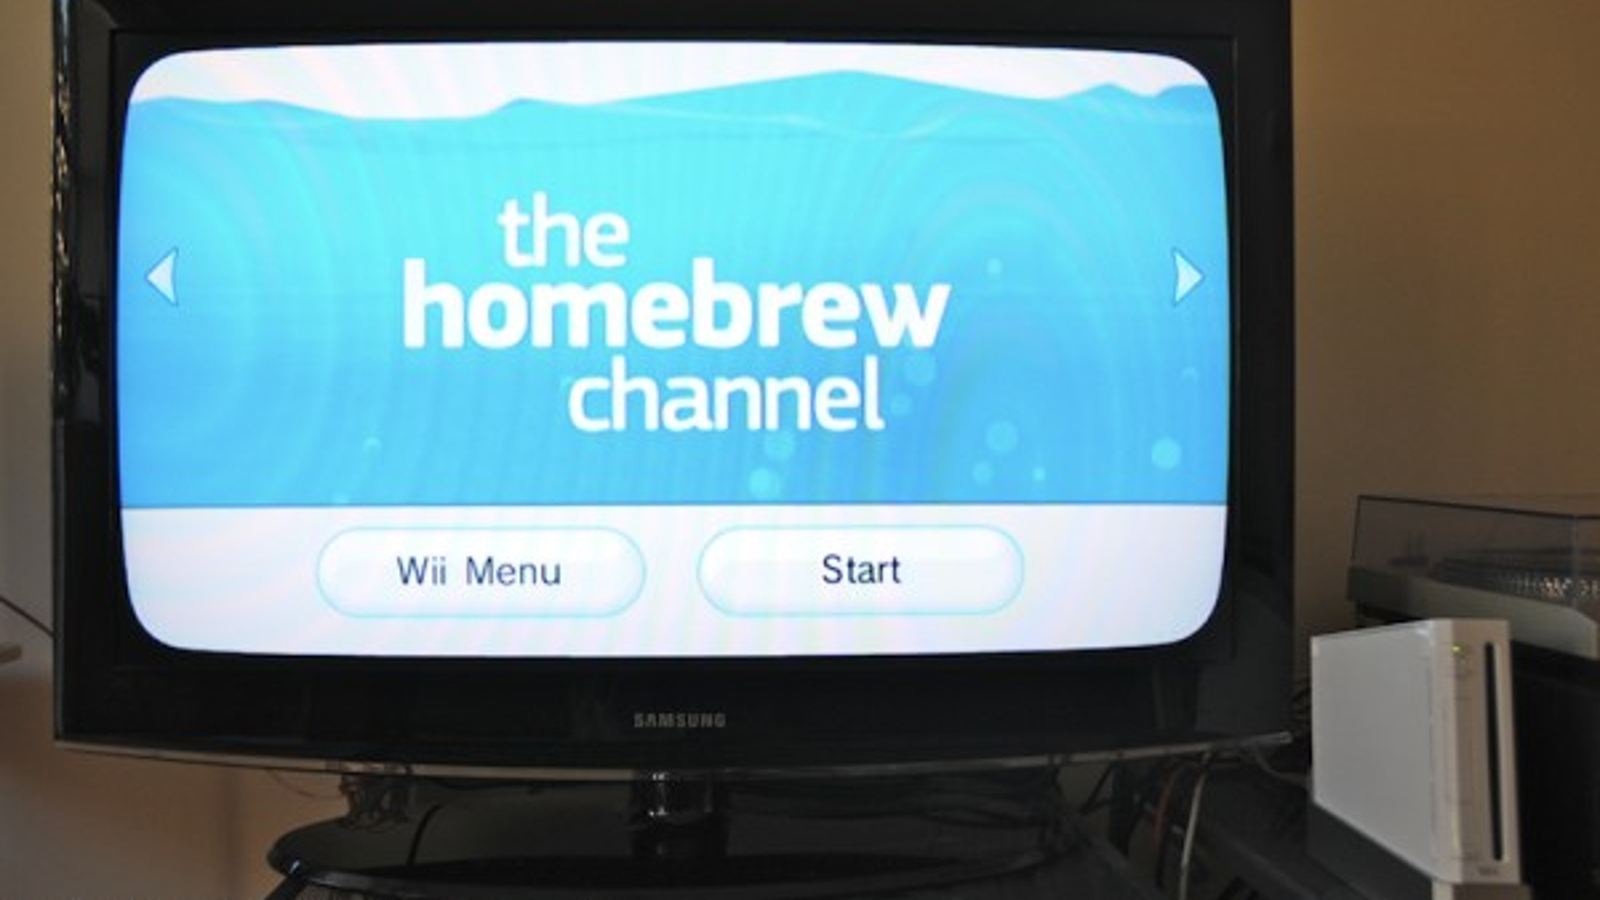 homebrew channel apps wii download